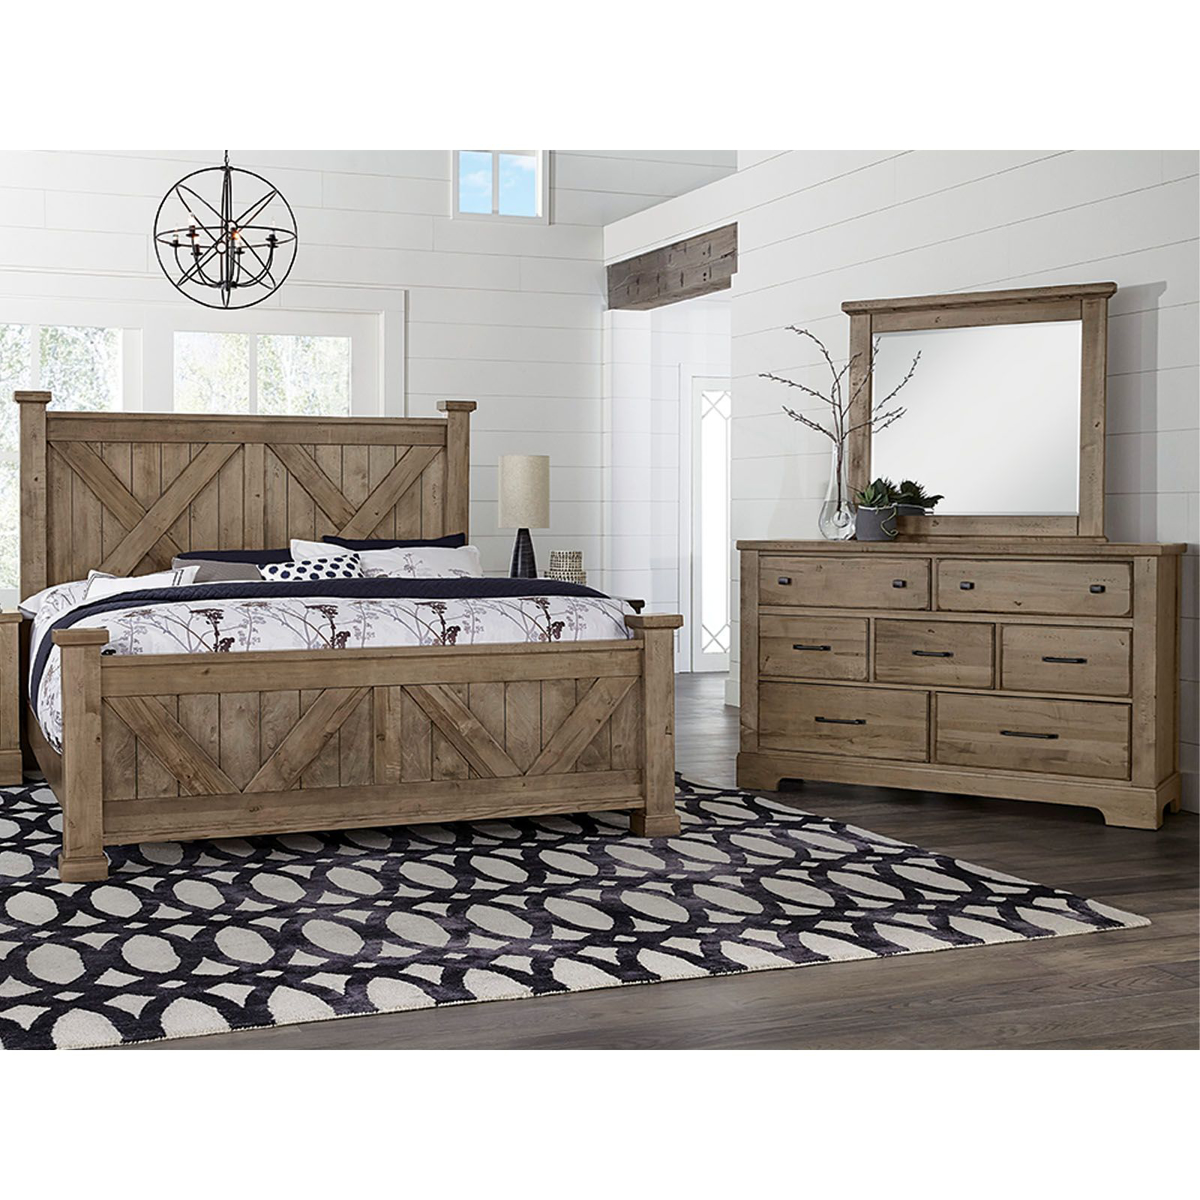 Picture of Cool Rustic 3-Piece Bedroom